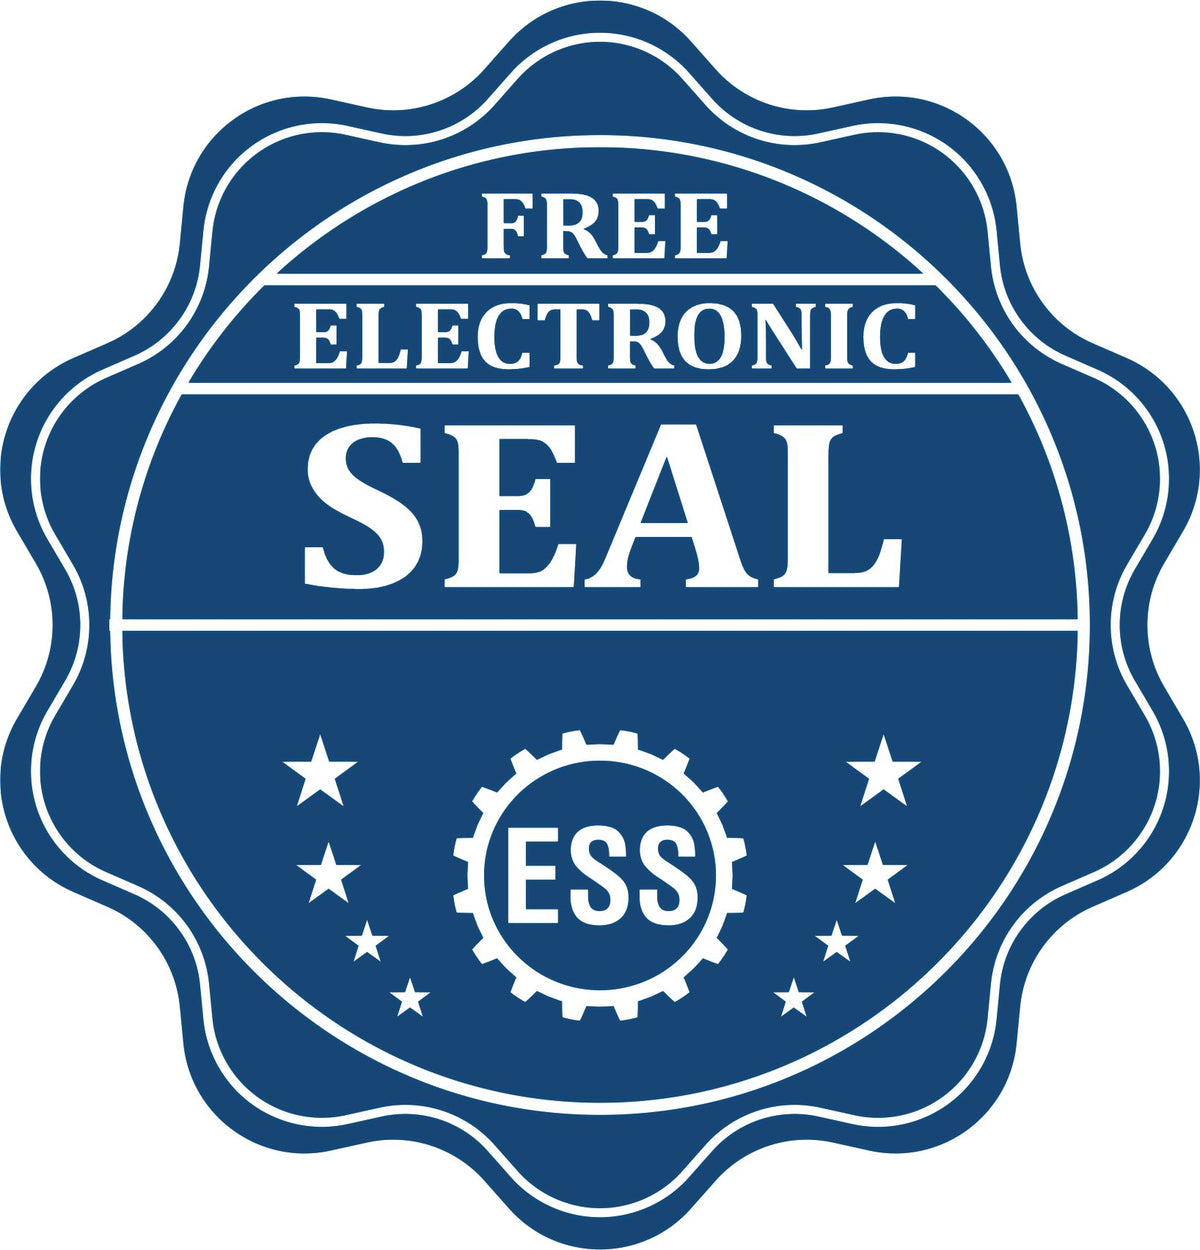 A badge showing a free electronic seal for the Extended Long Reach Nebraska Surveyor Embosser with stars and the ESS gear on the emblem.